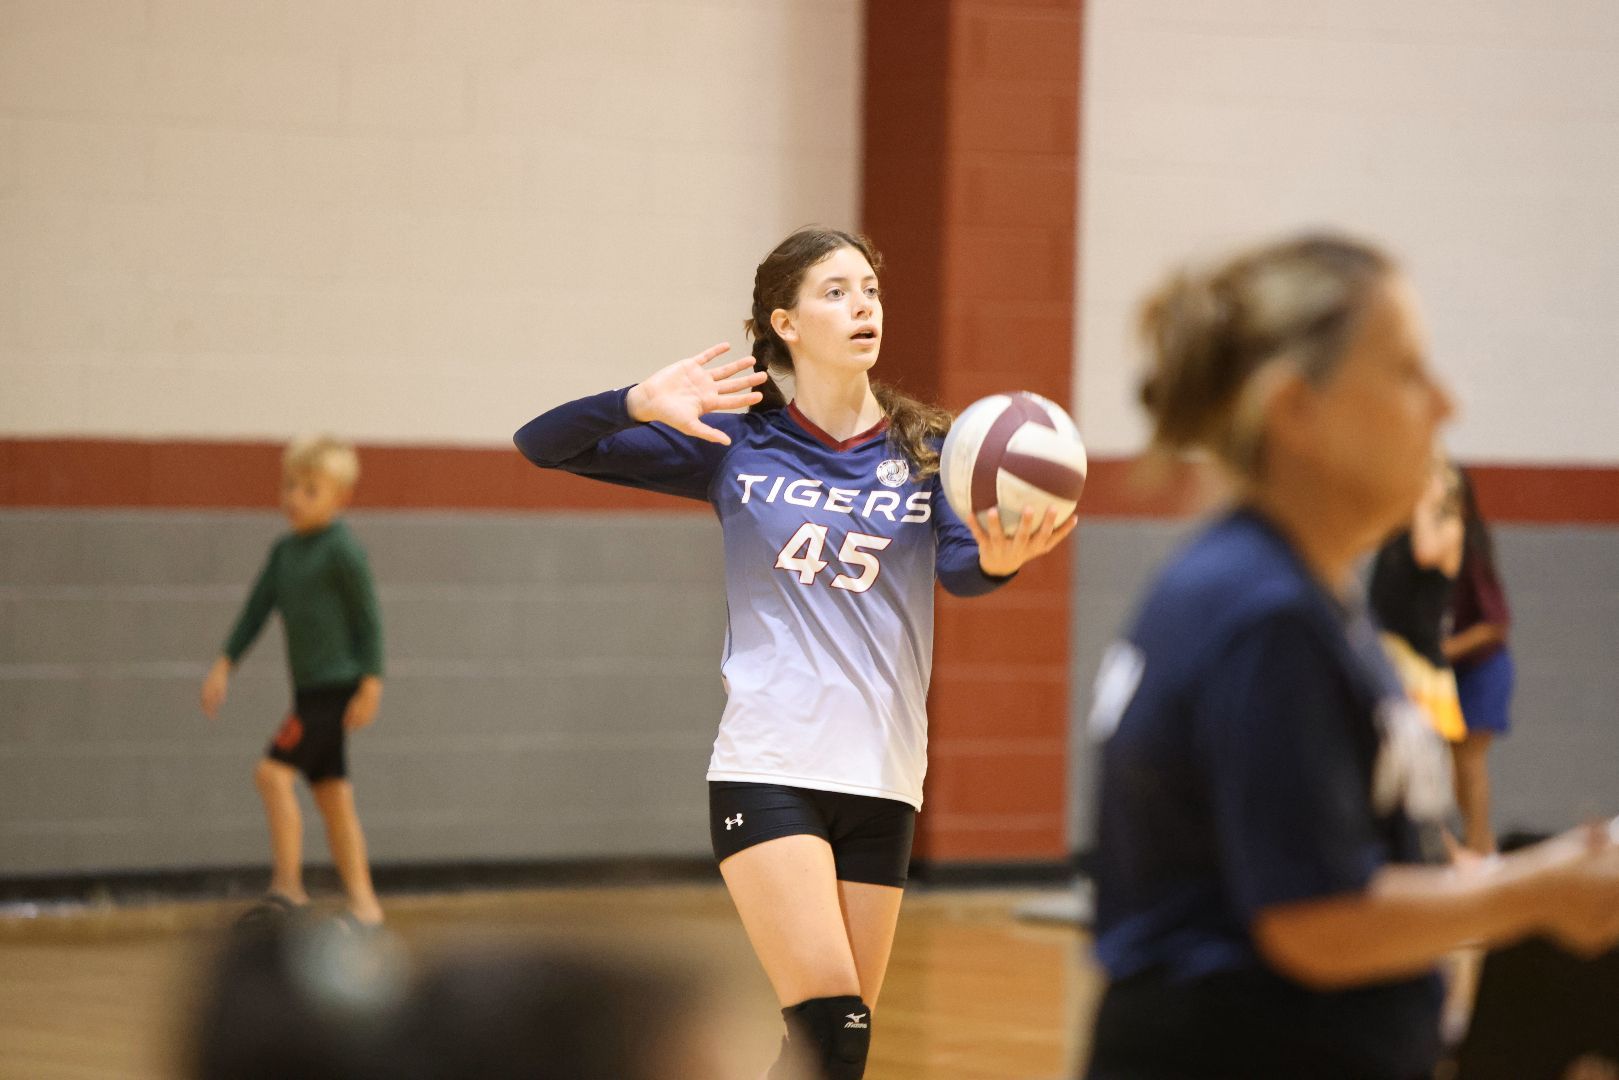 A volleyball player with the number 45 on her jersey